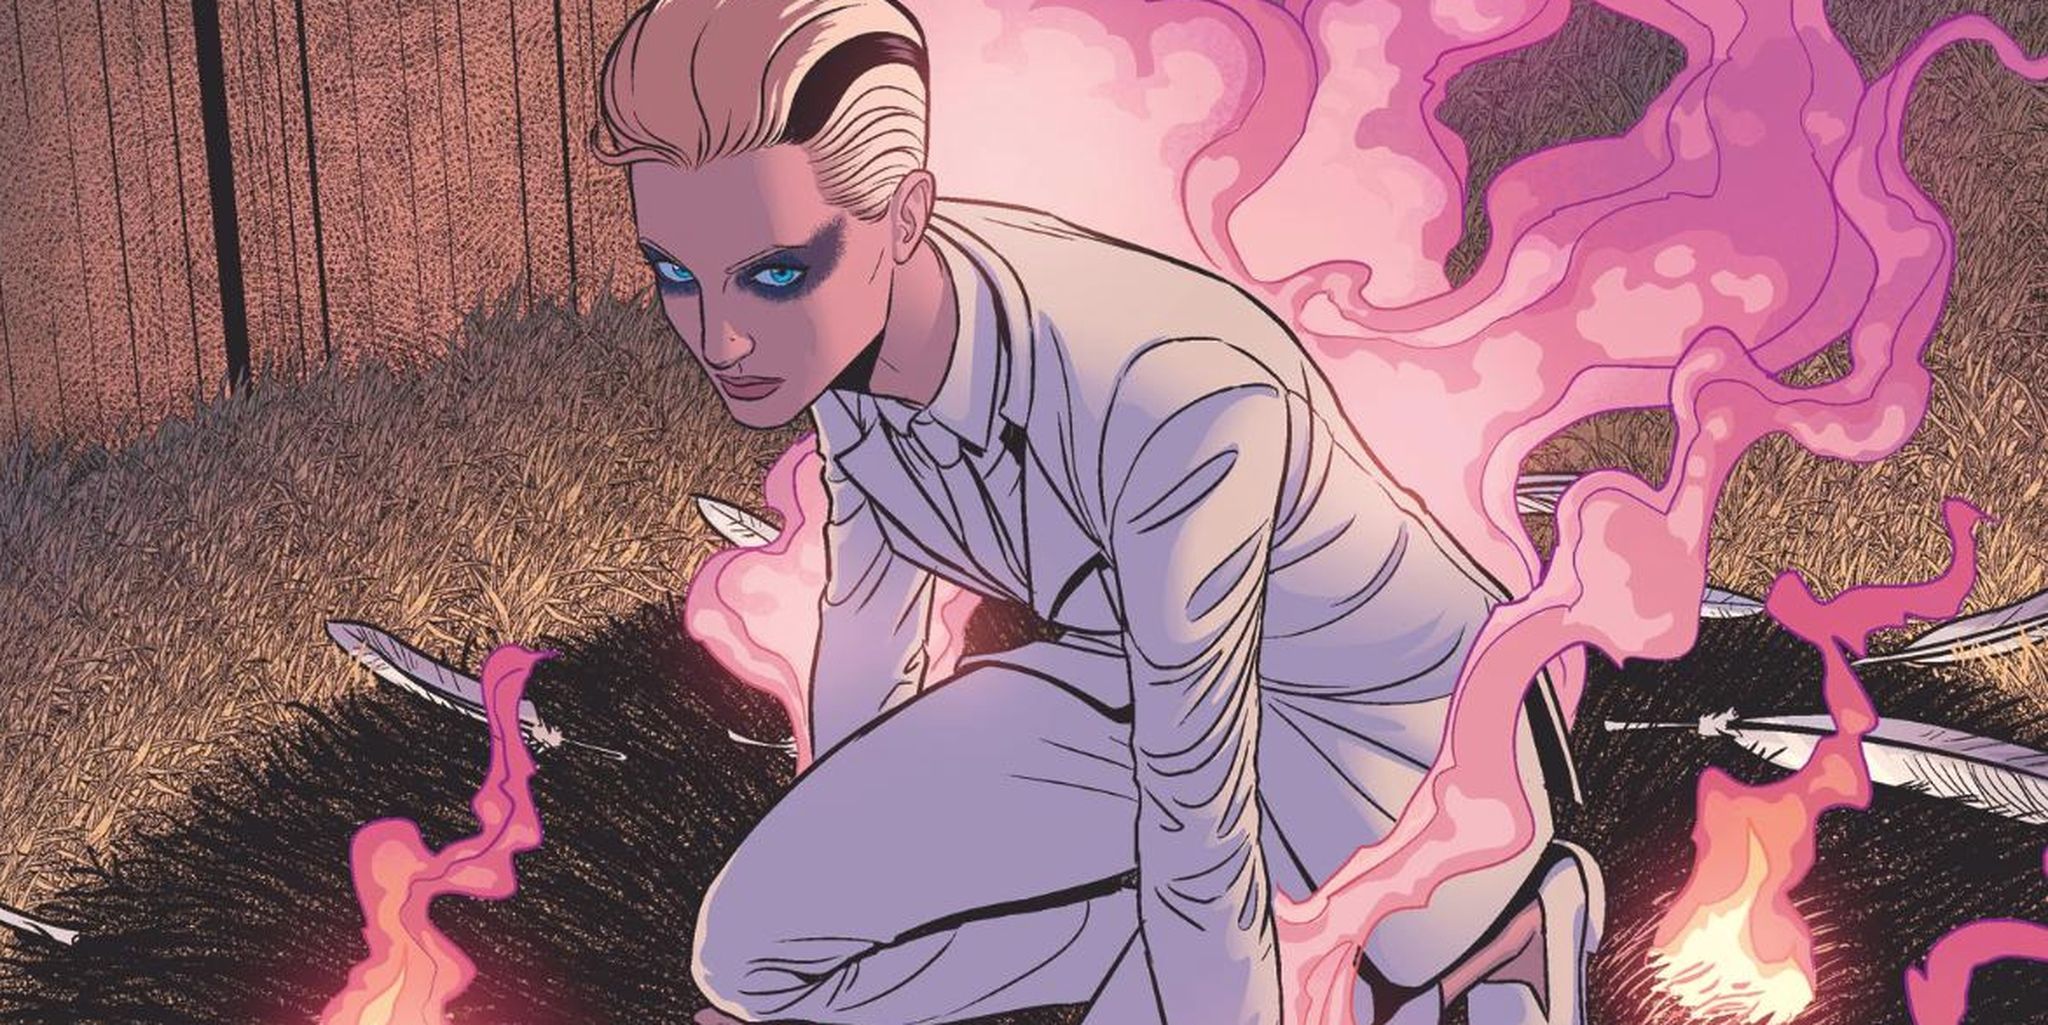 Lucifer in The Wicked + The Divine comic.